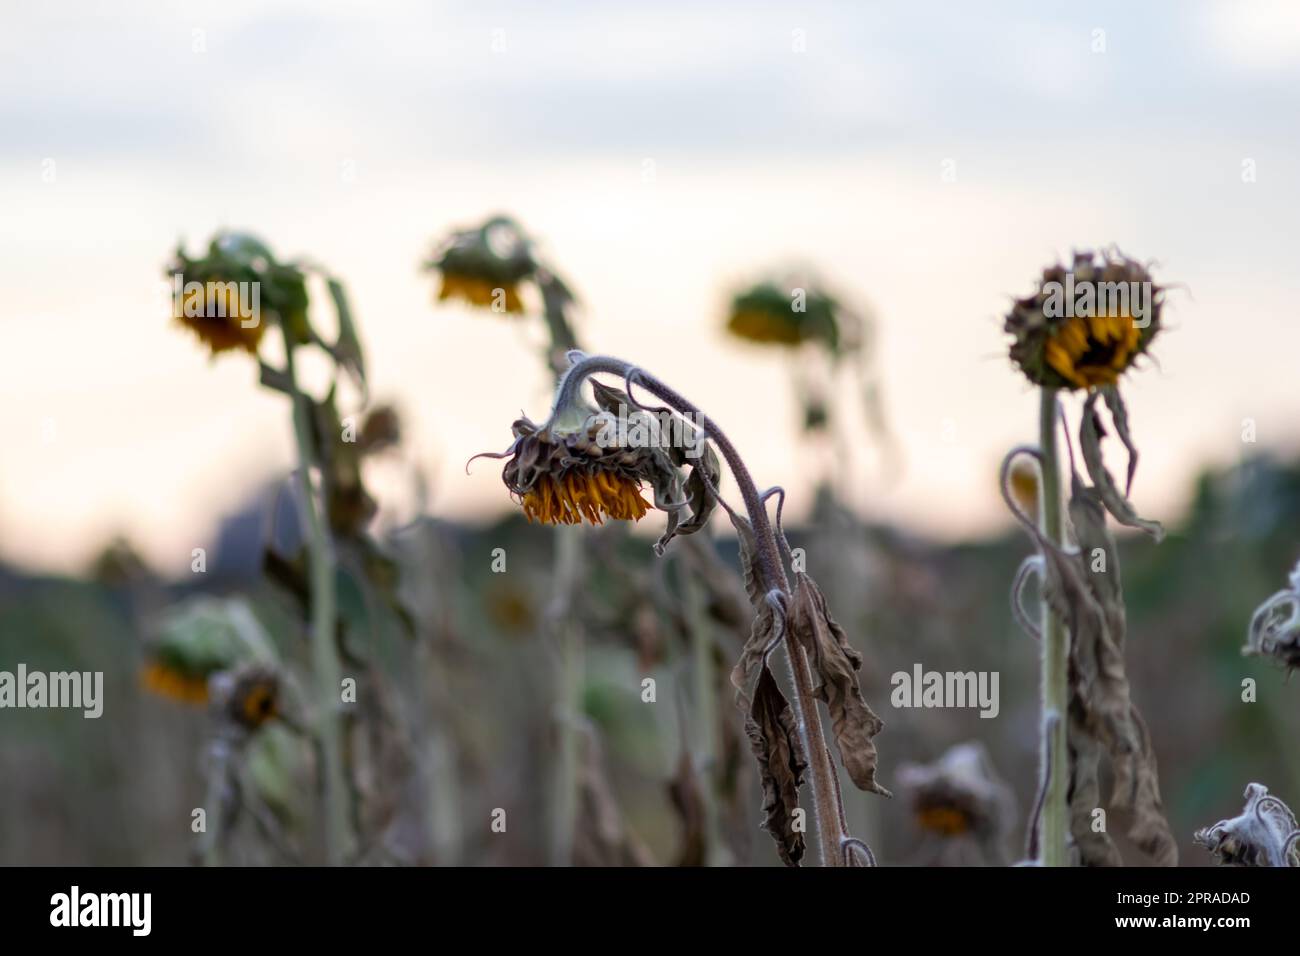 Drought with dry and withered sunflowers in extreme heat periode with hot temperatures and no rainfall due to global warming causes crop shortfall with water shortage on agricultural sunflower fields Stock Photo